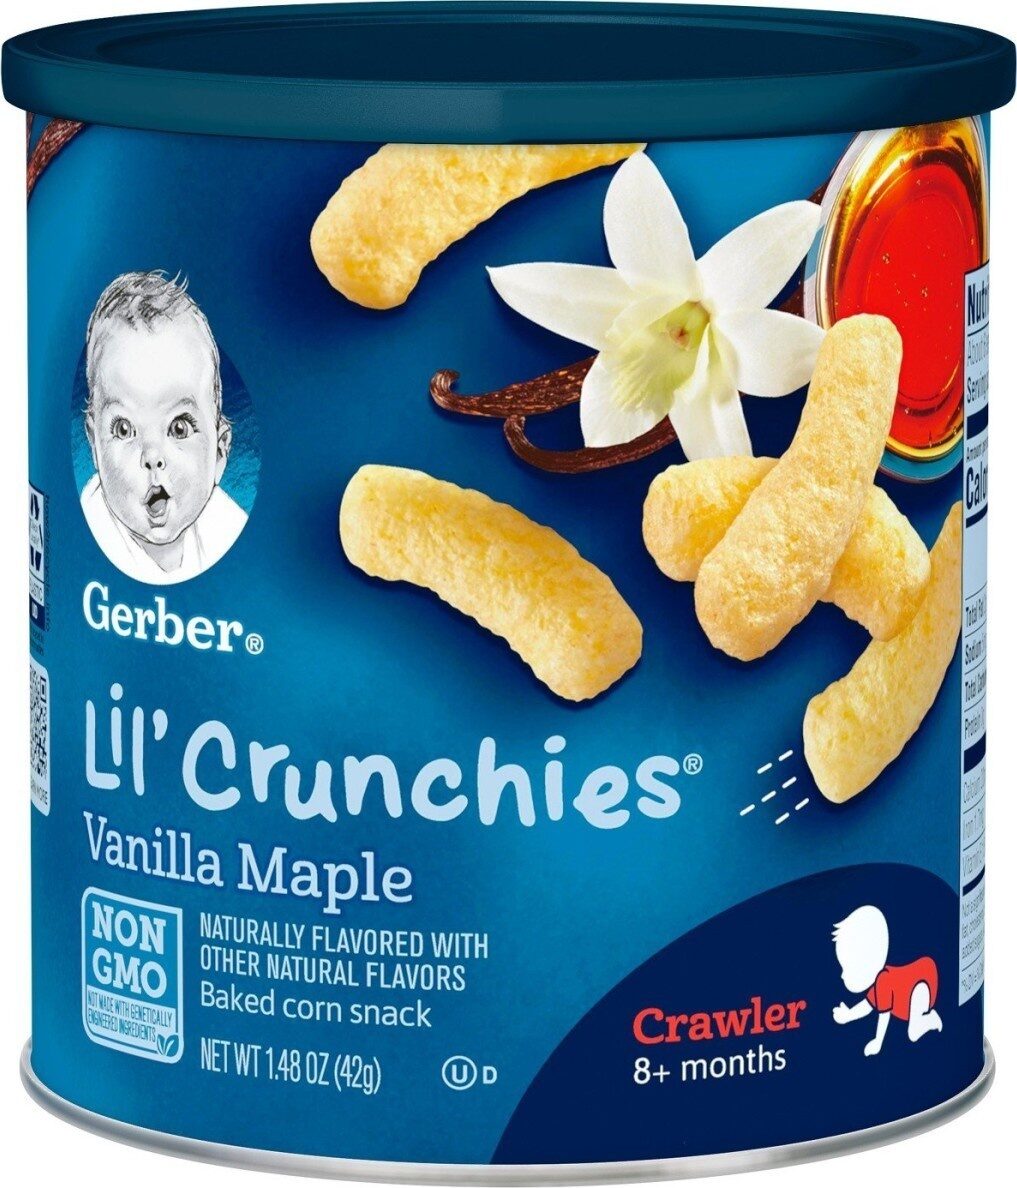 Lil crunchies - Product